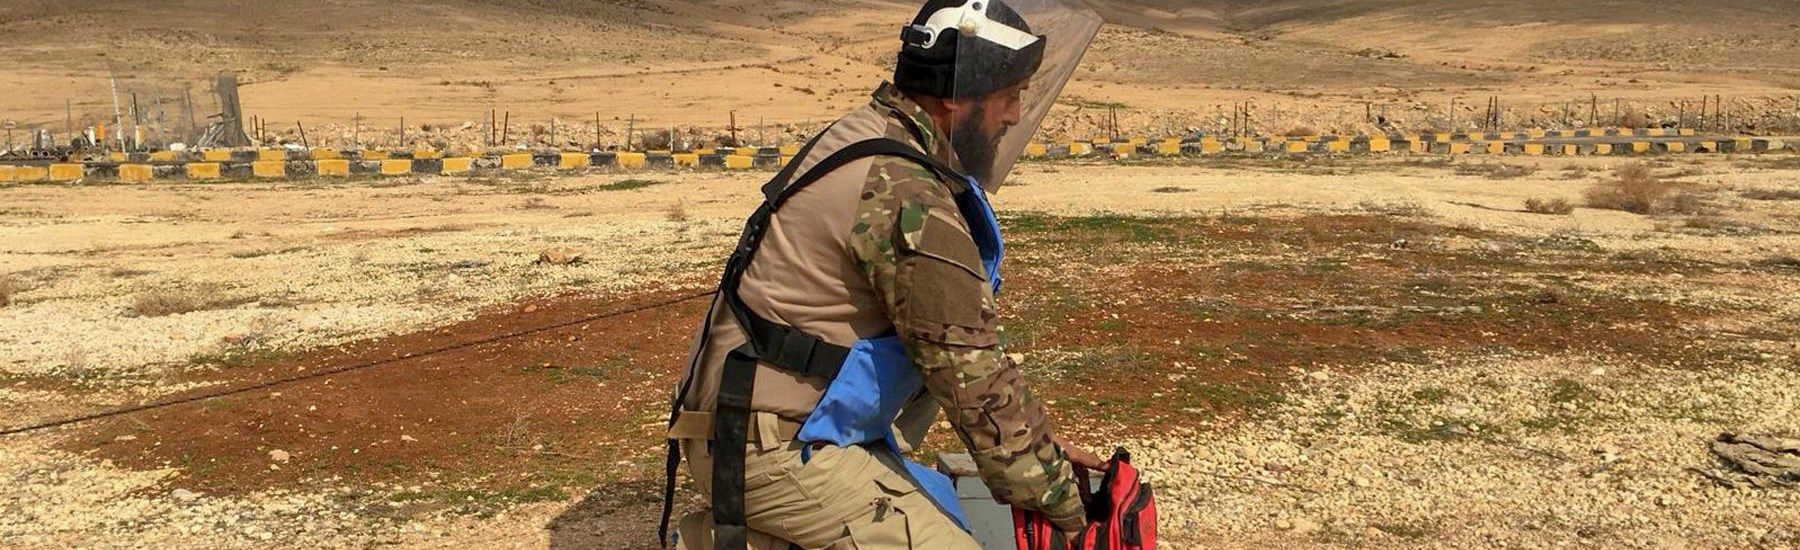 “HALO Trust” Implements Demining Project in Qa’atabah